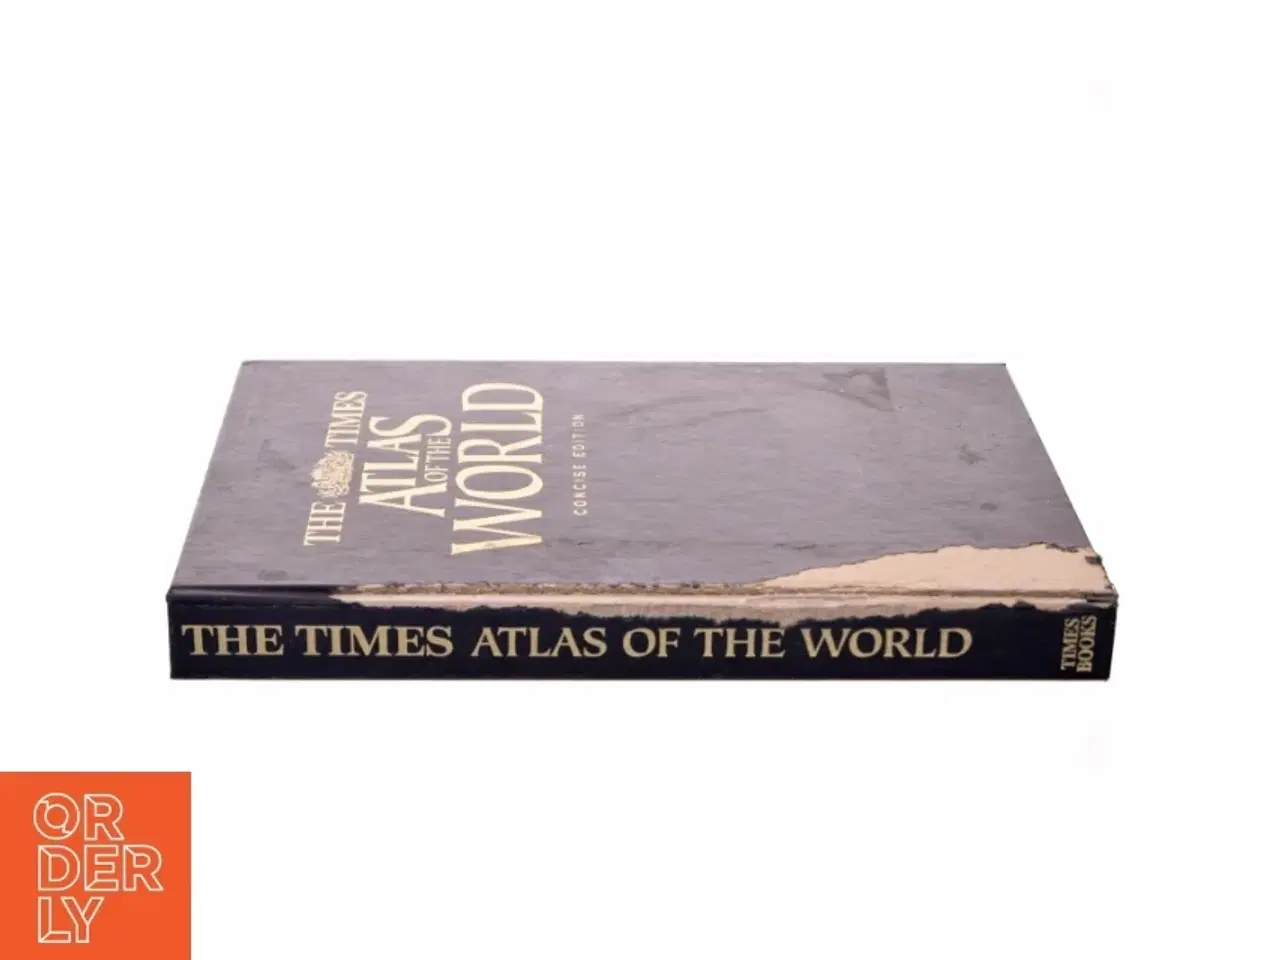 Billede 2 - The Times Atlas of the World fra The Times